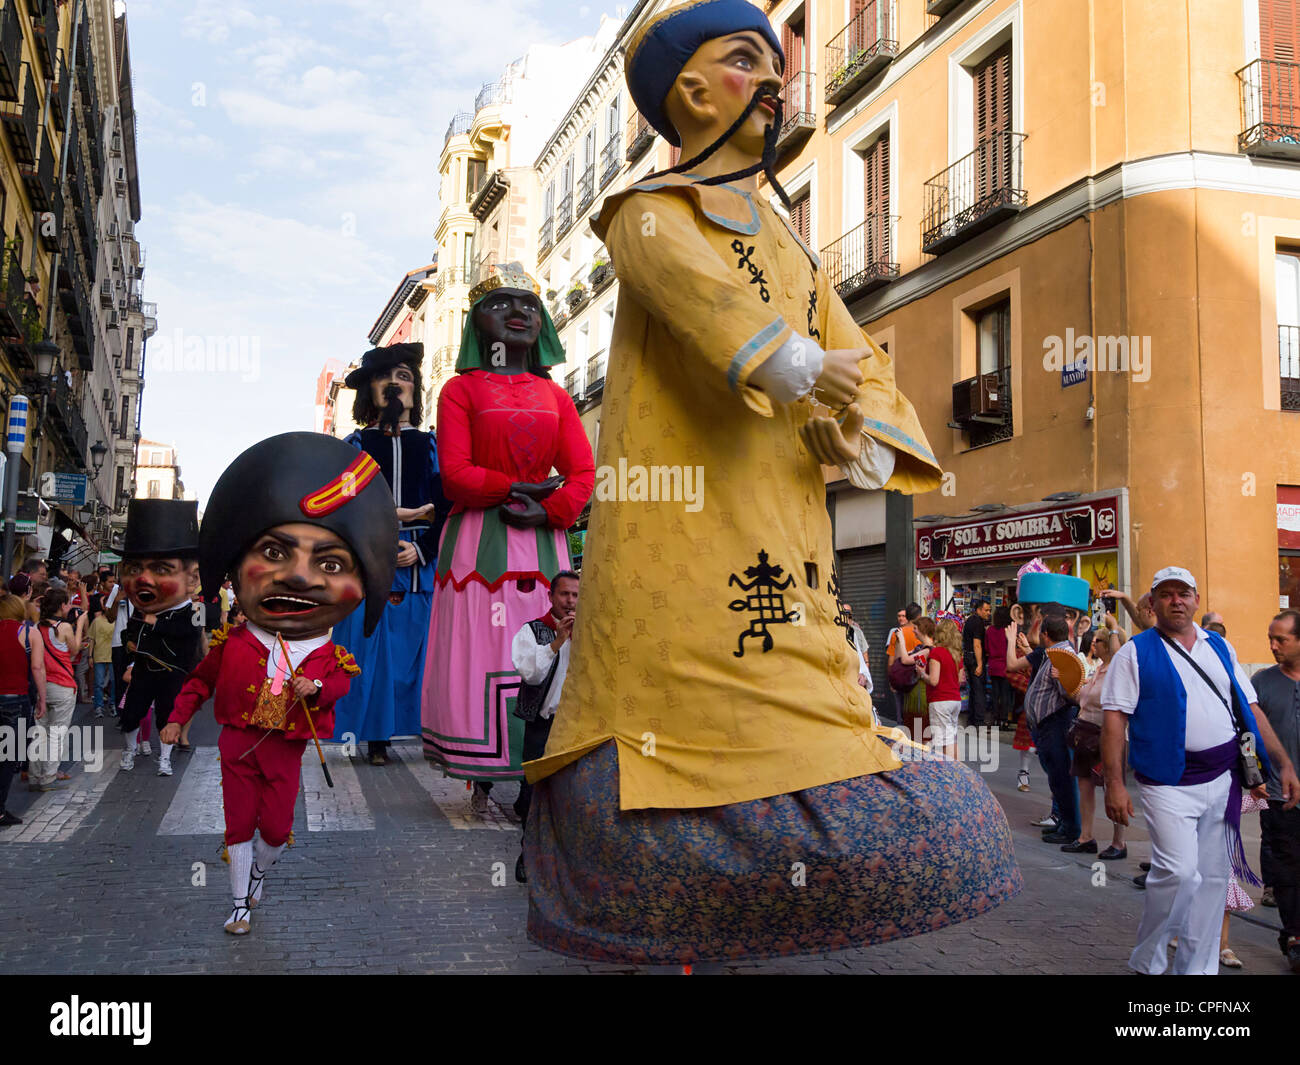 Giants and big-heads (gigantes y cabezudos) puppet parade during the San Isidro festivities in Madrid, Spain, 11 May 2012 Stock Photo